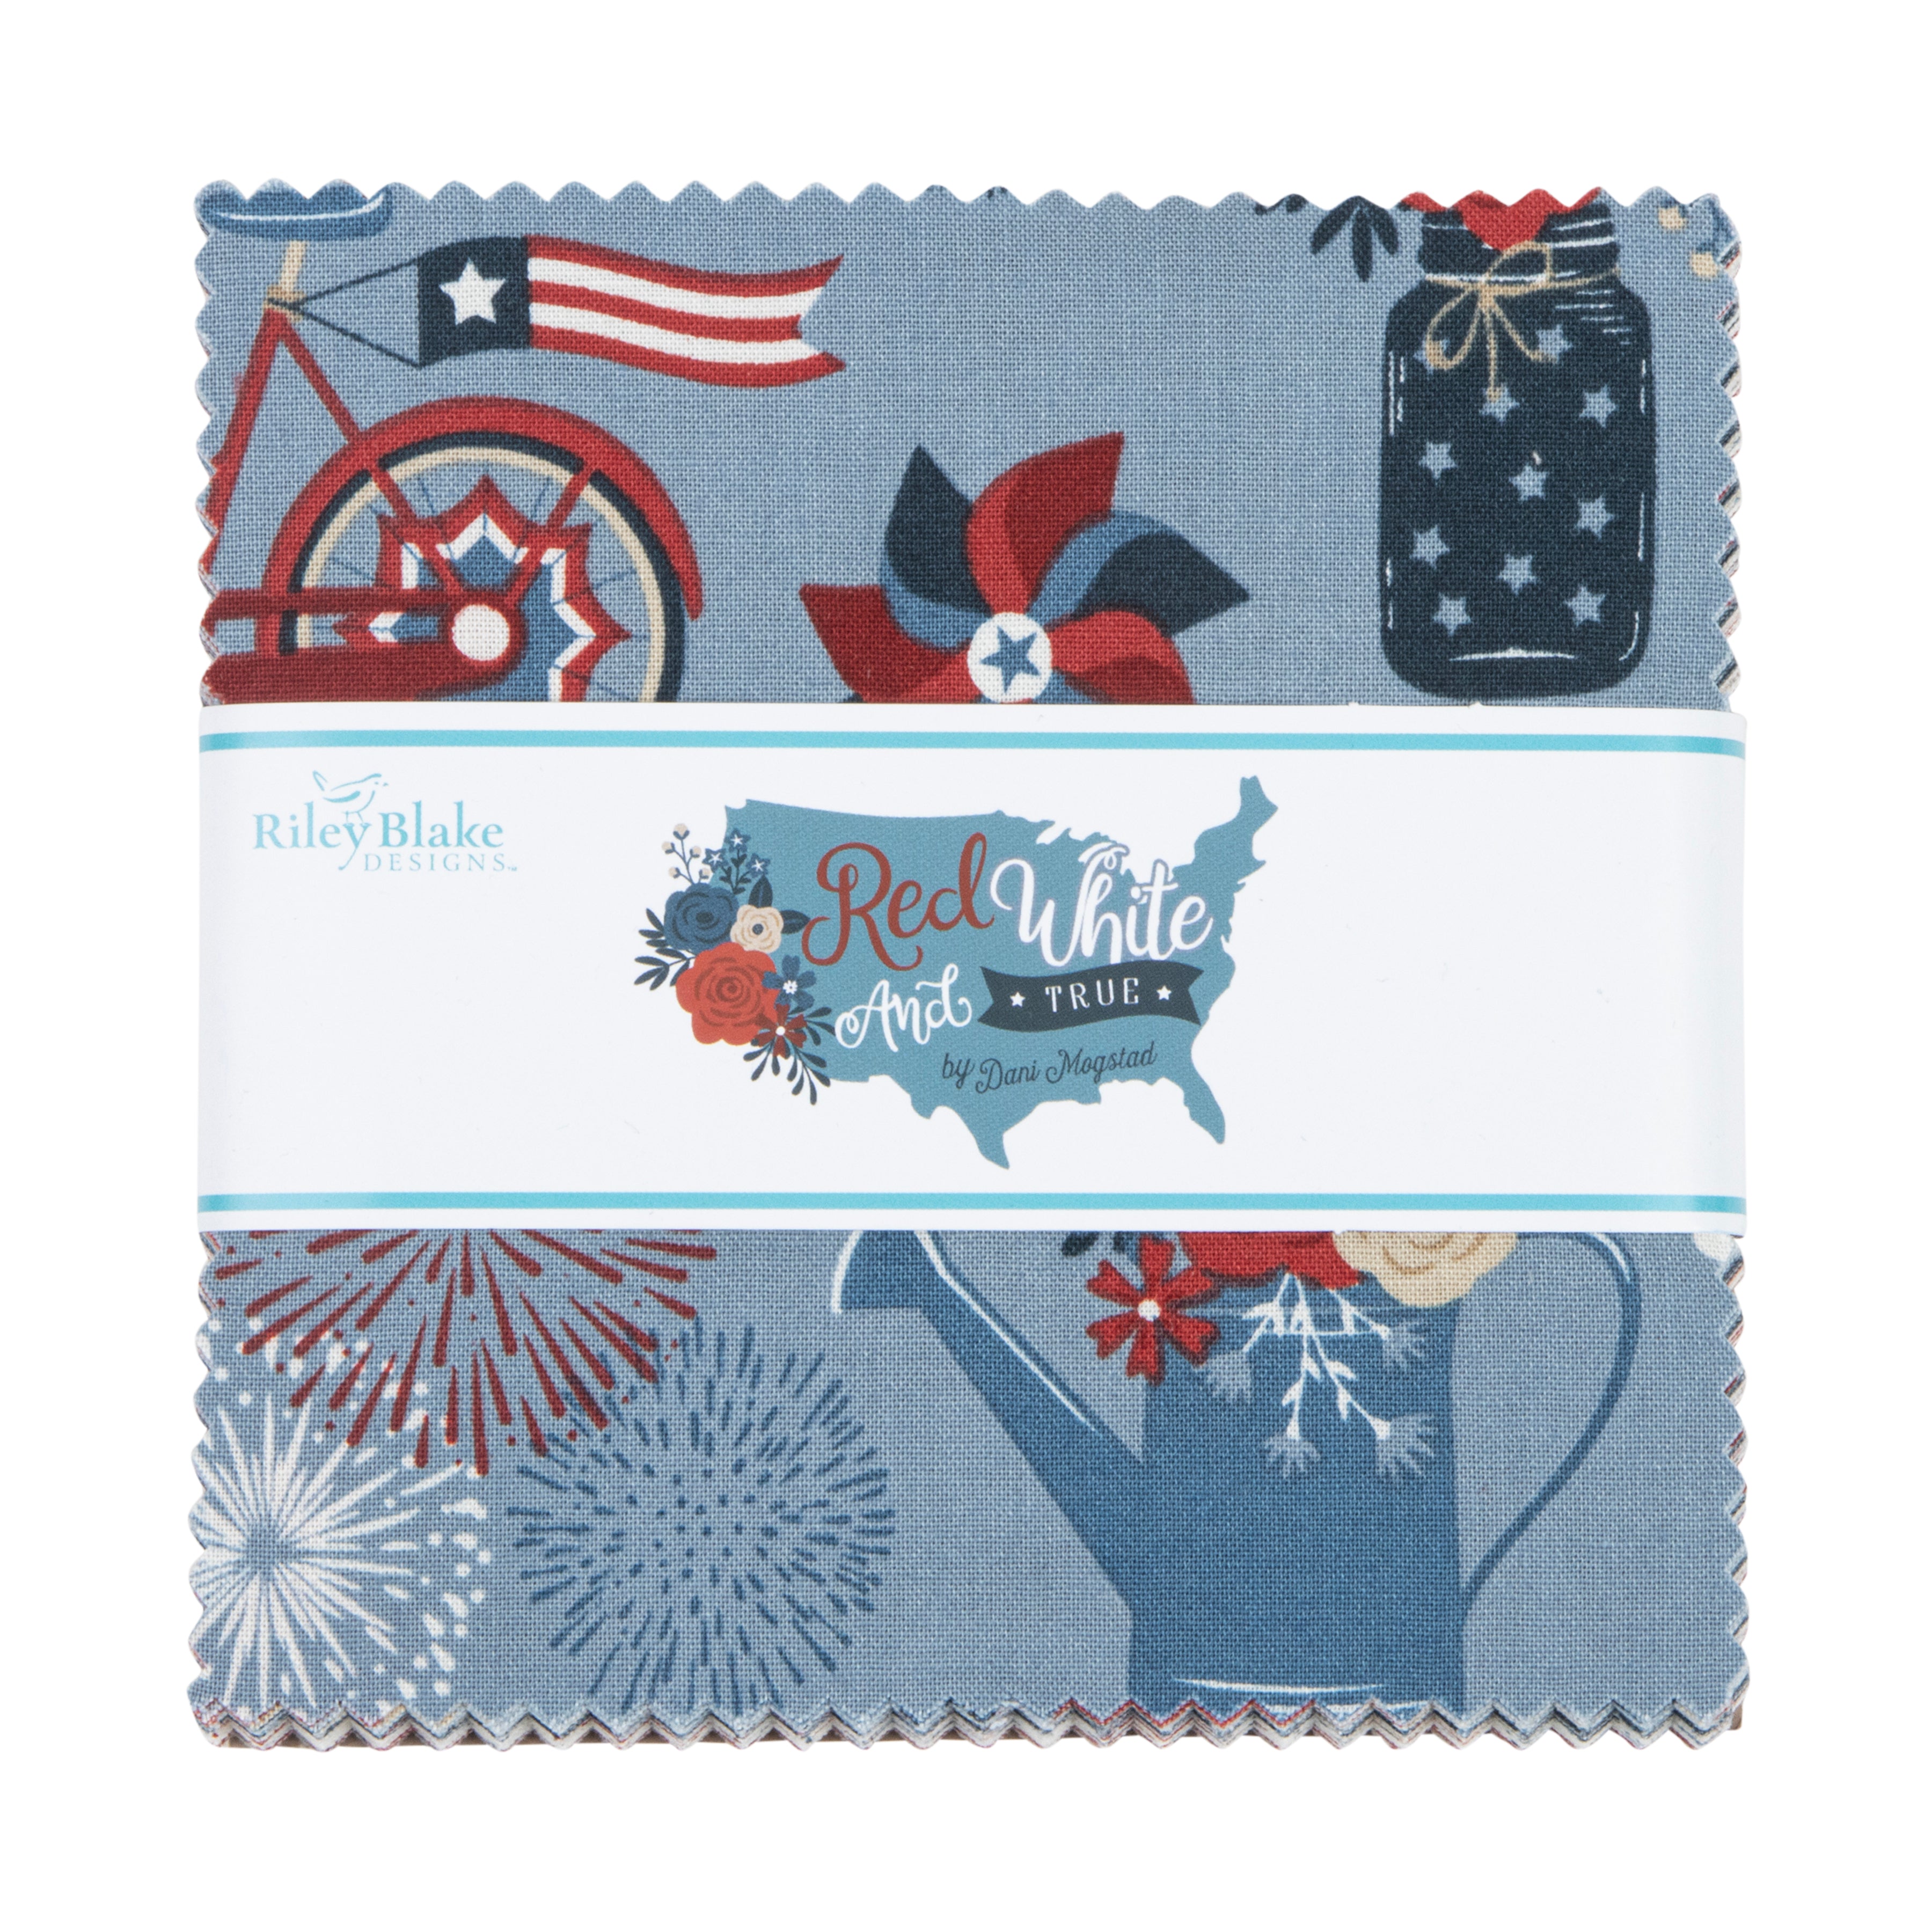 Red, White & True | 5-inch Charm Pack by Dani Mogstad for Riley Blake | 42pcs